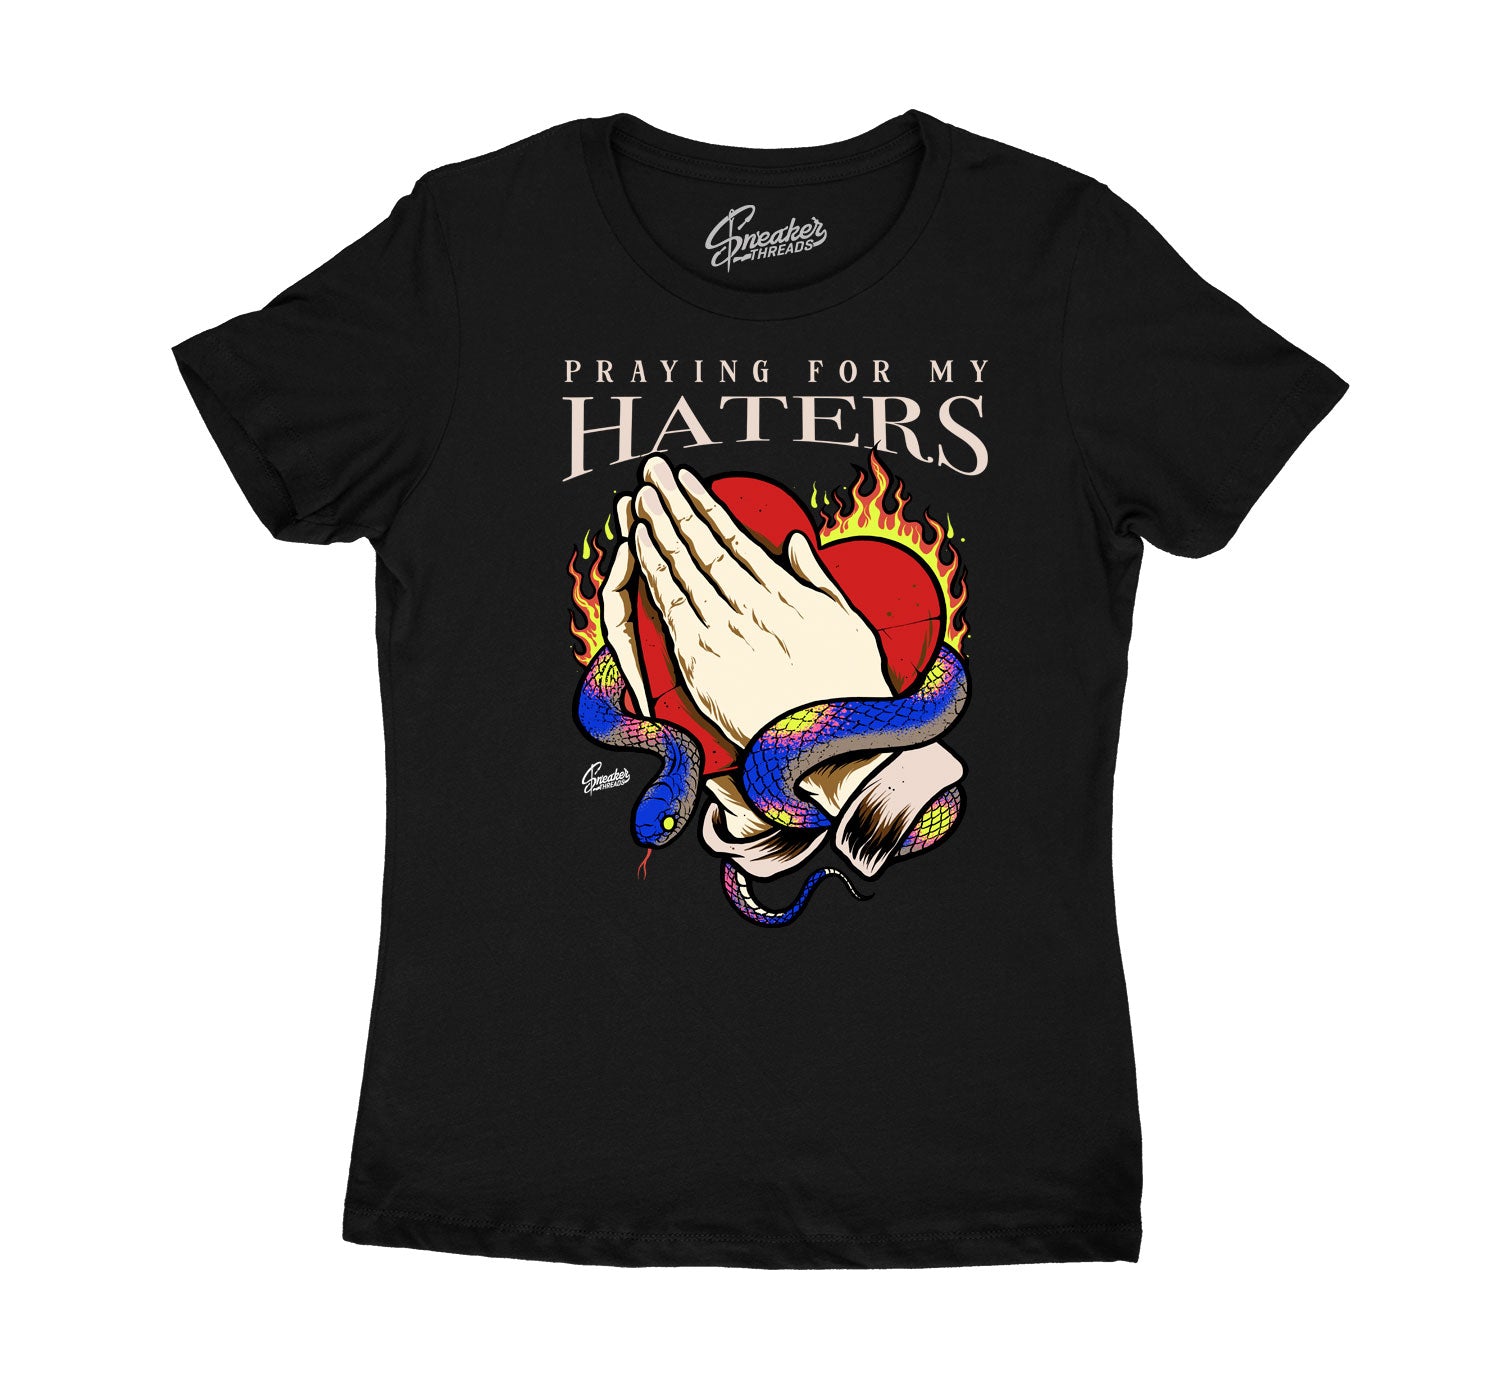 Womens Wild Things 4 Shirt - Pray For My Haters - Black